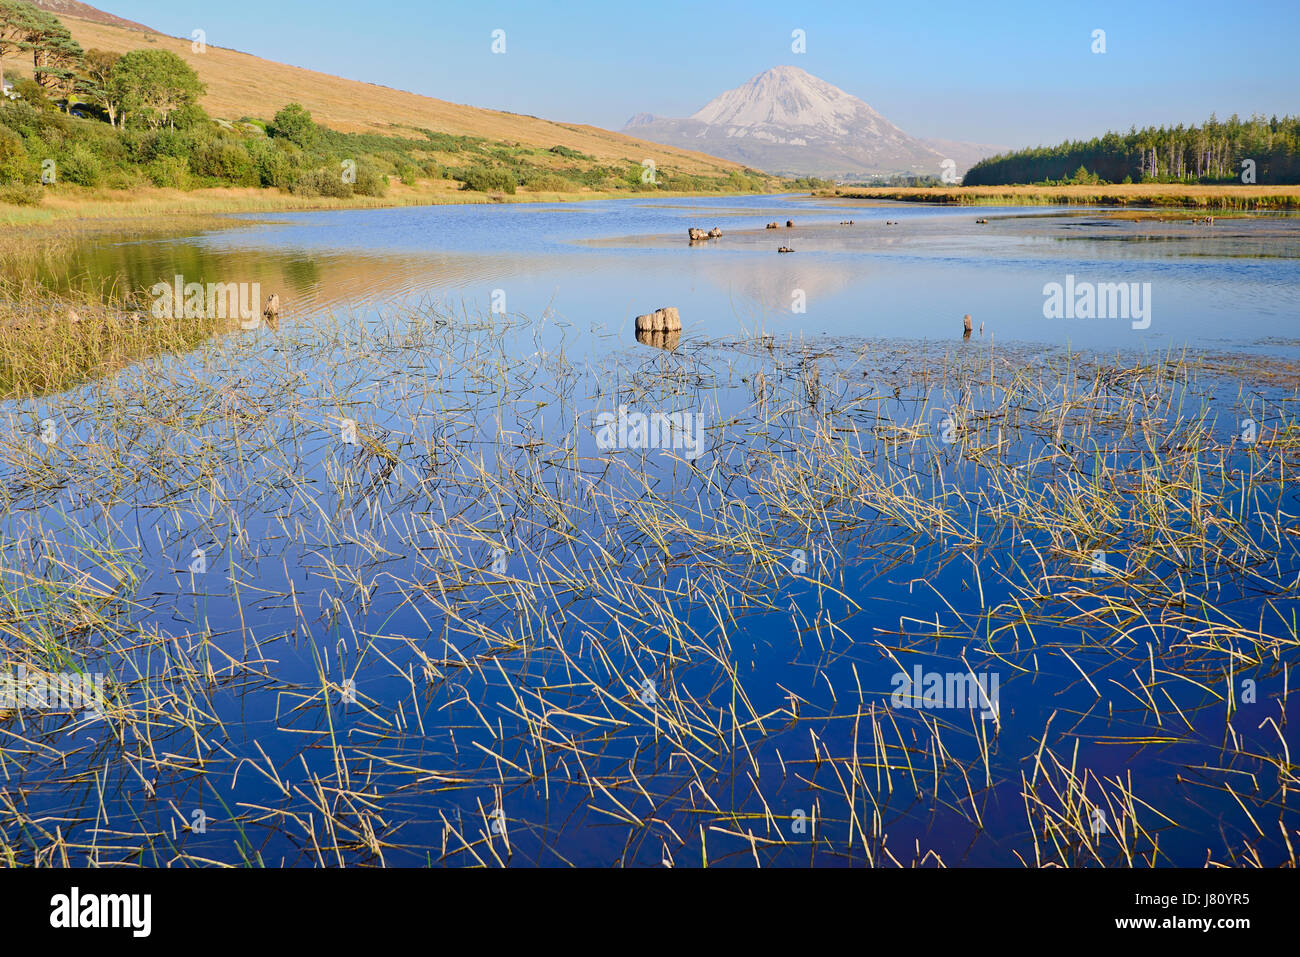 Irland, County Donegal, Clady River mit Mount Errigal in der Ferne. Stockfoto